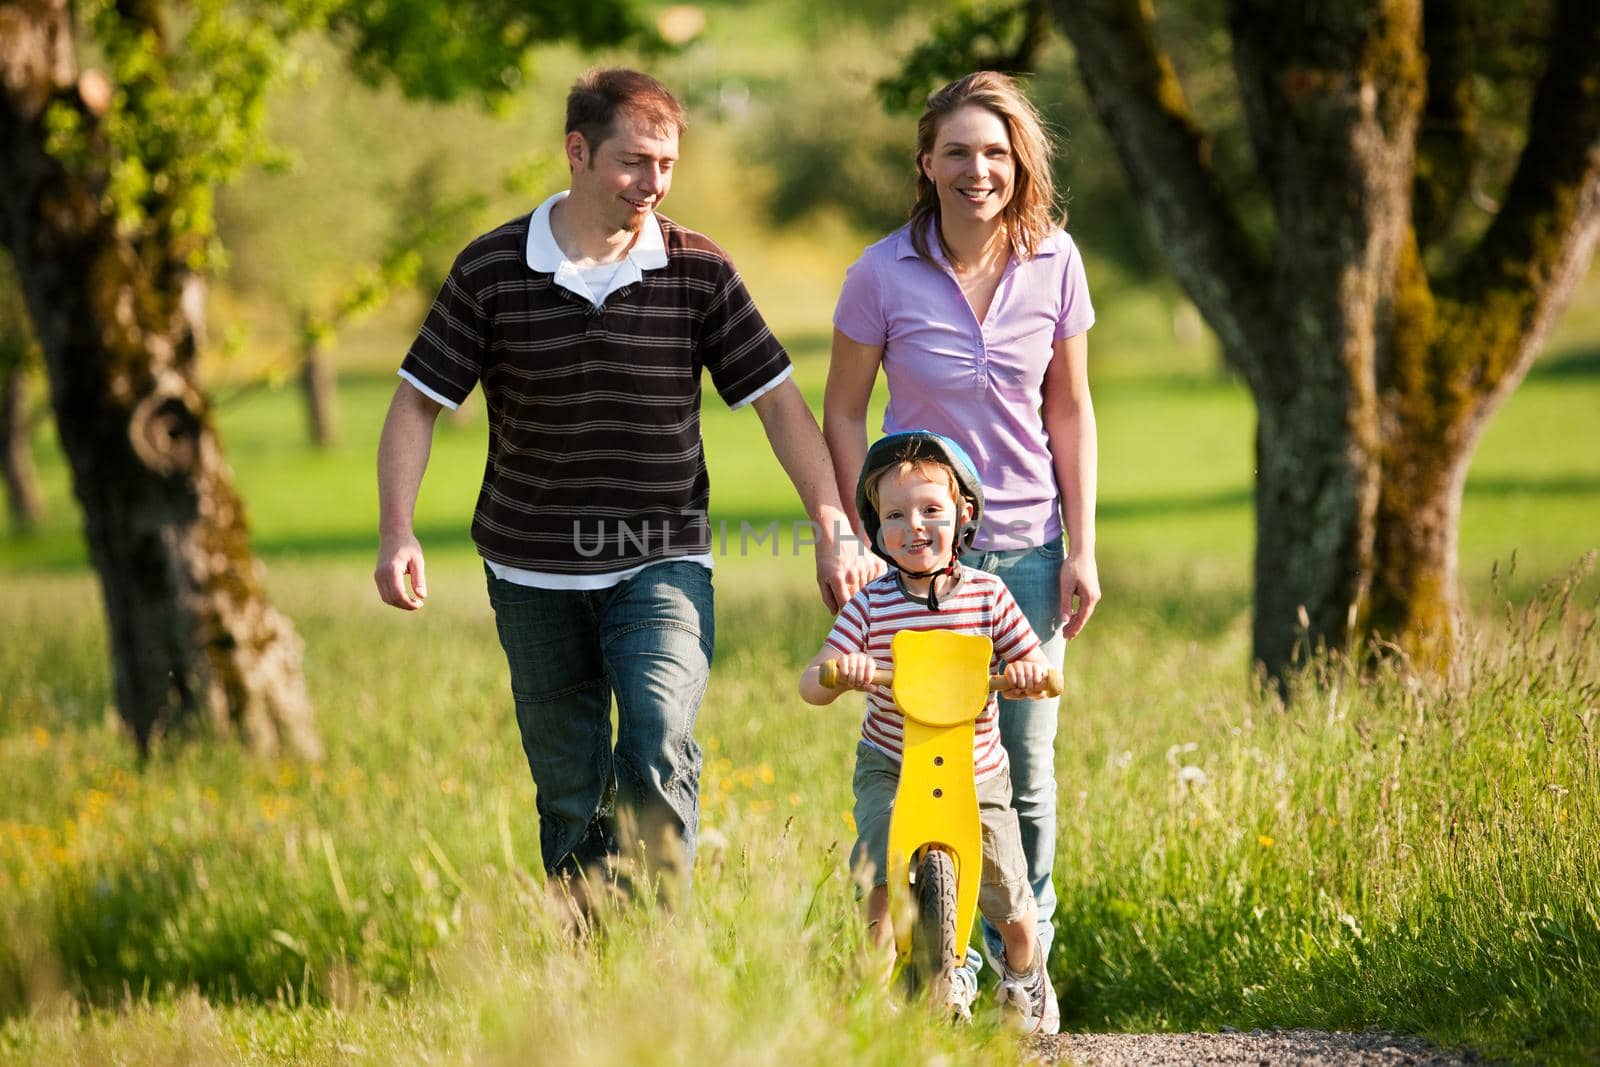 Family having a walk outdoors in summer, their little son using a training bike, unspoiled nature